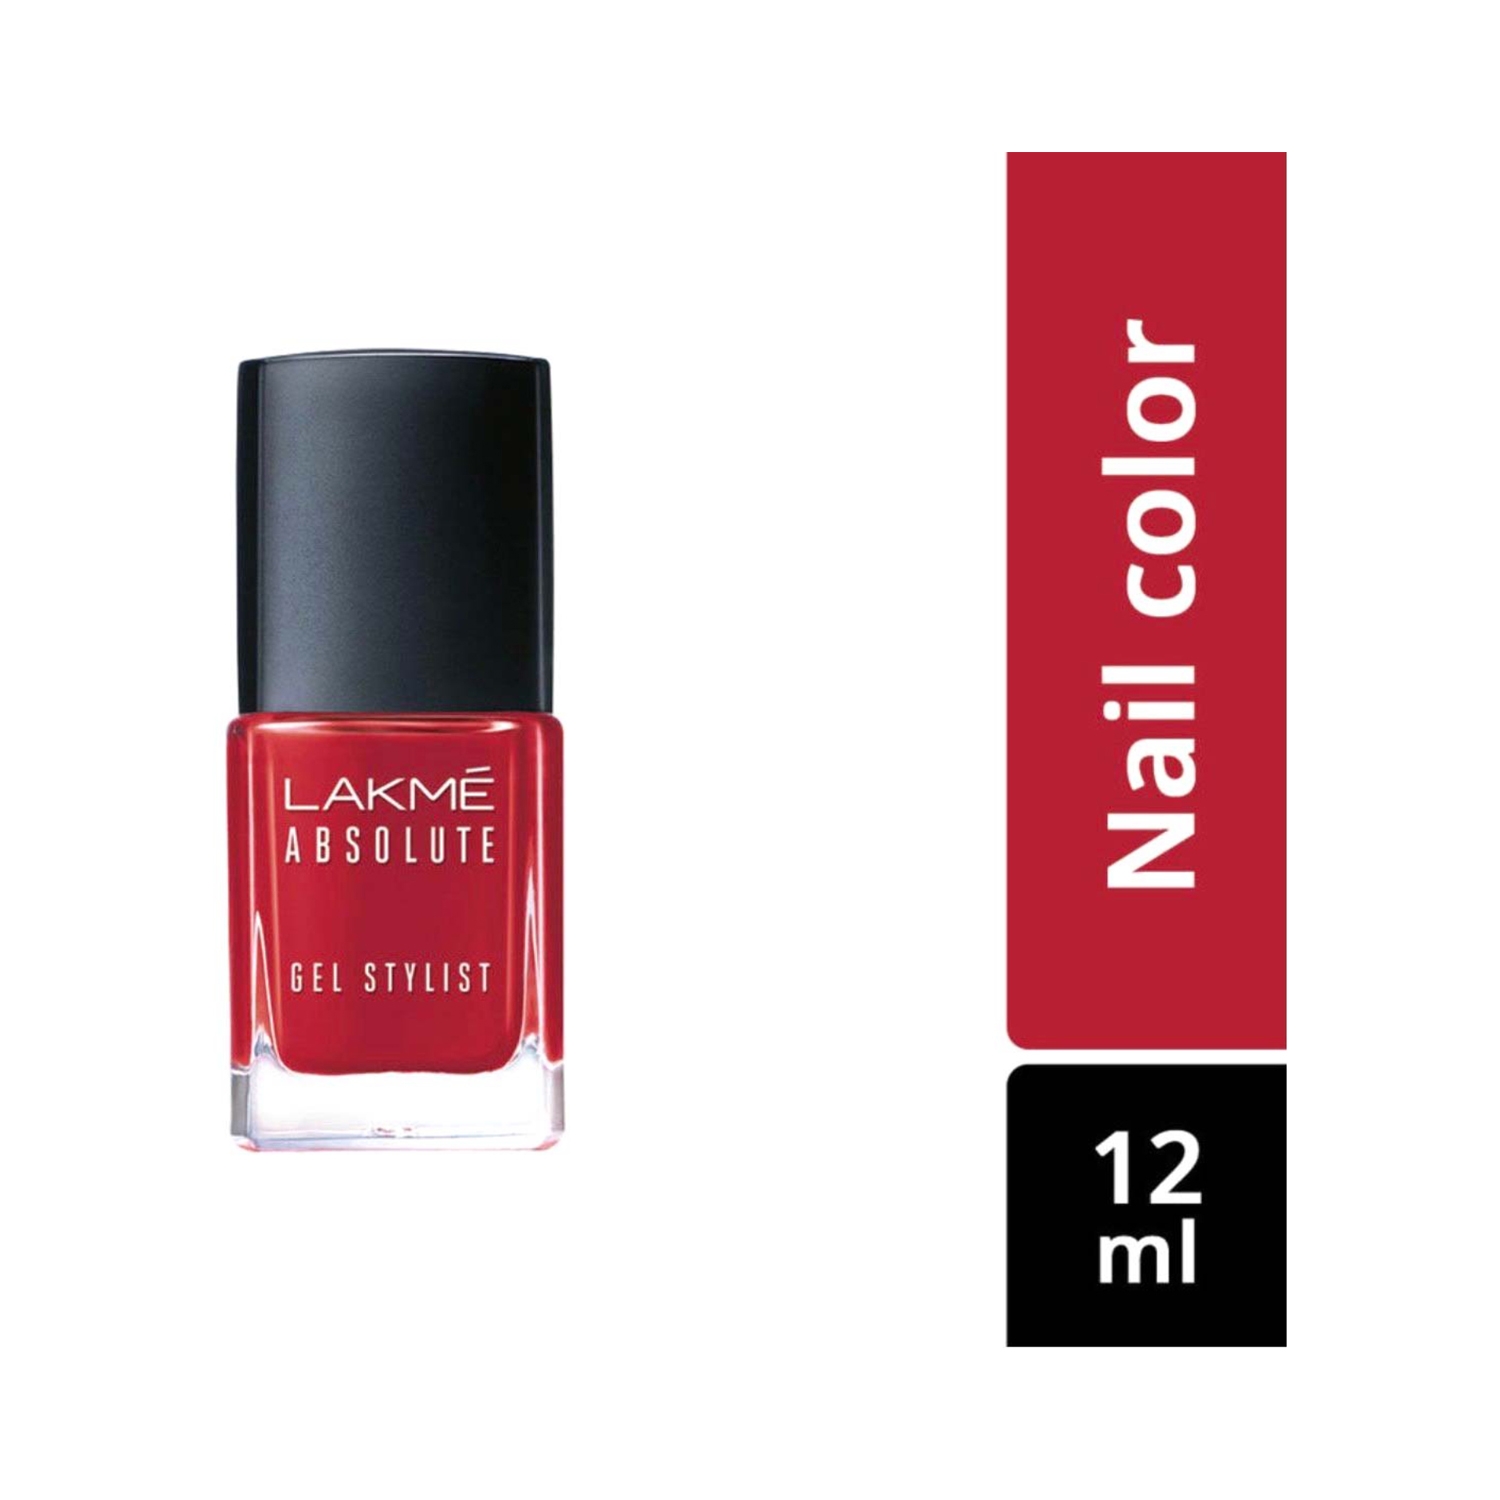 Lakme | Lakme Absolute Gel Stylist Nail Color - Scarlet Red (12ml)